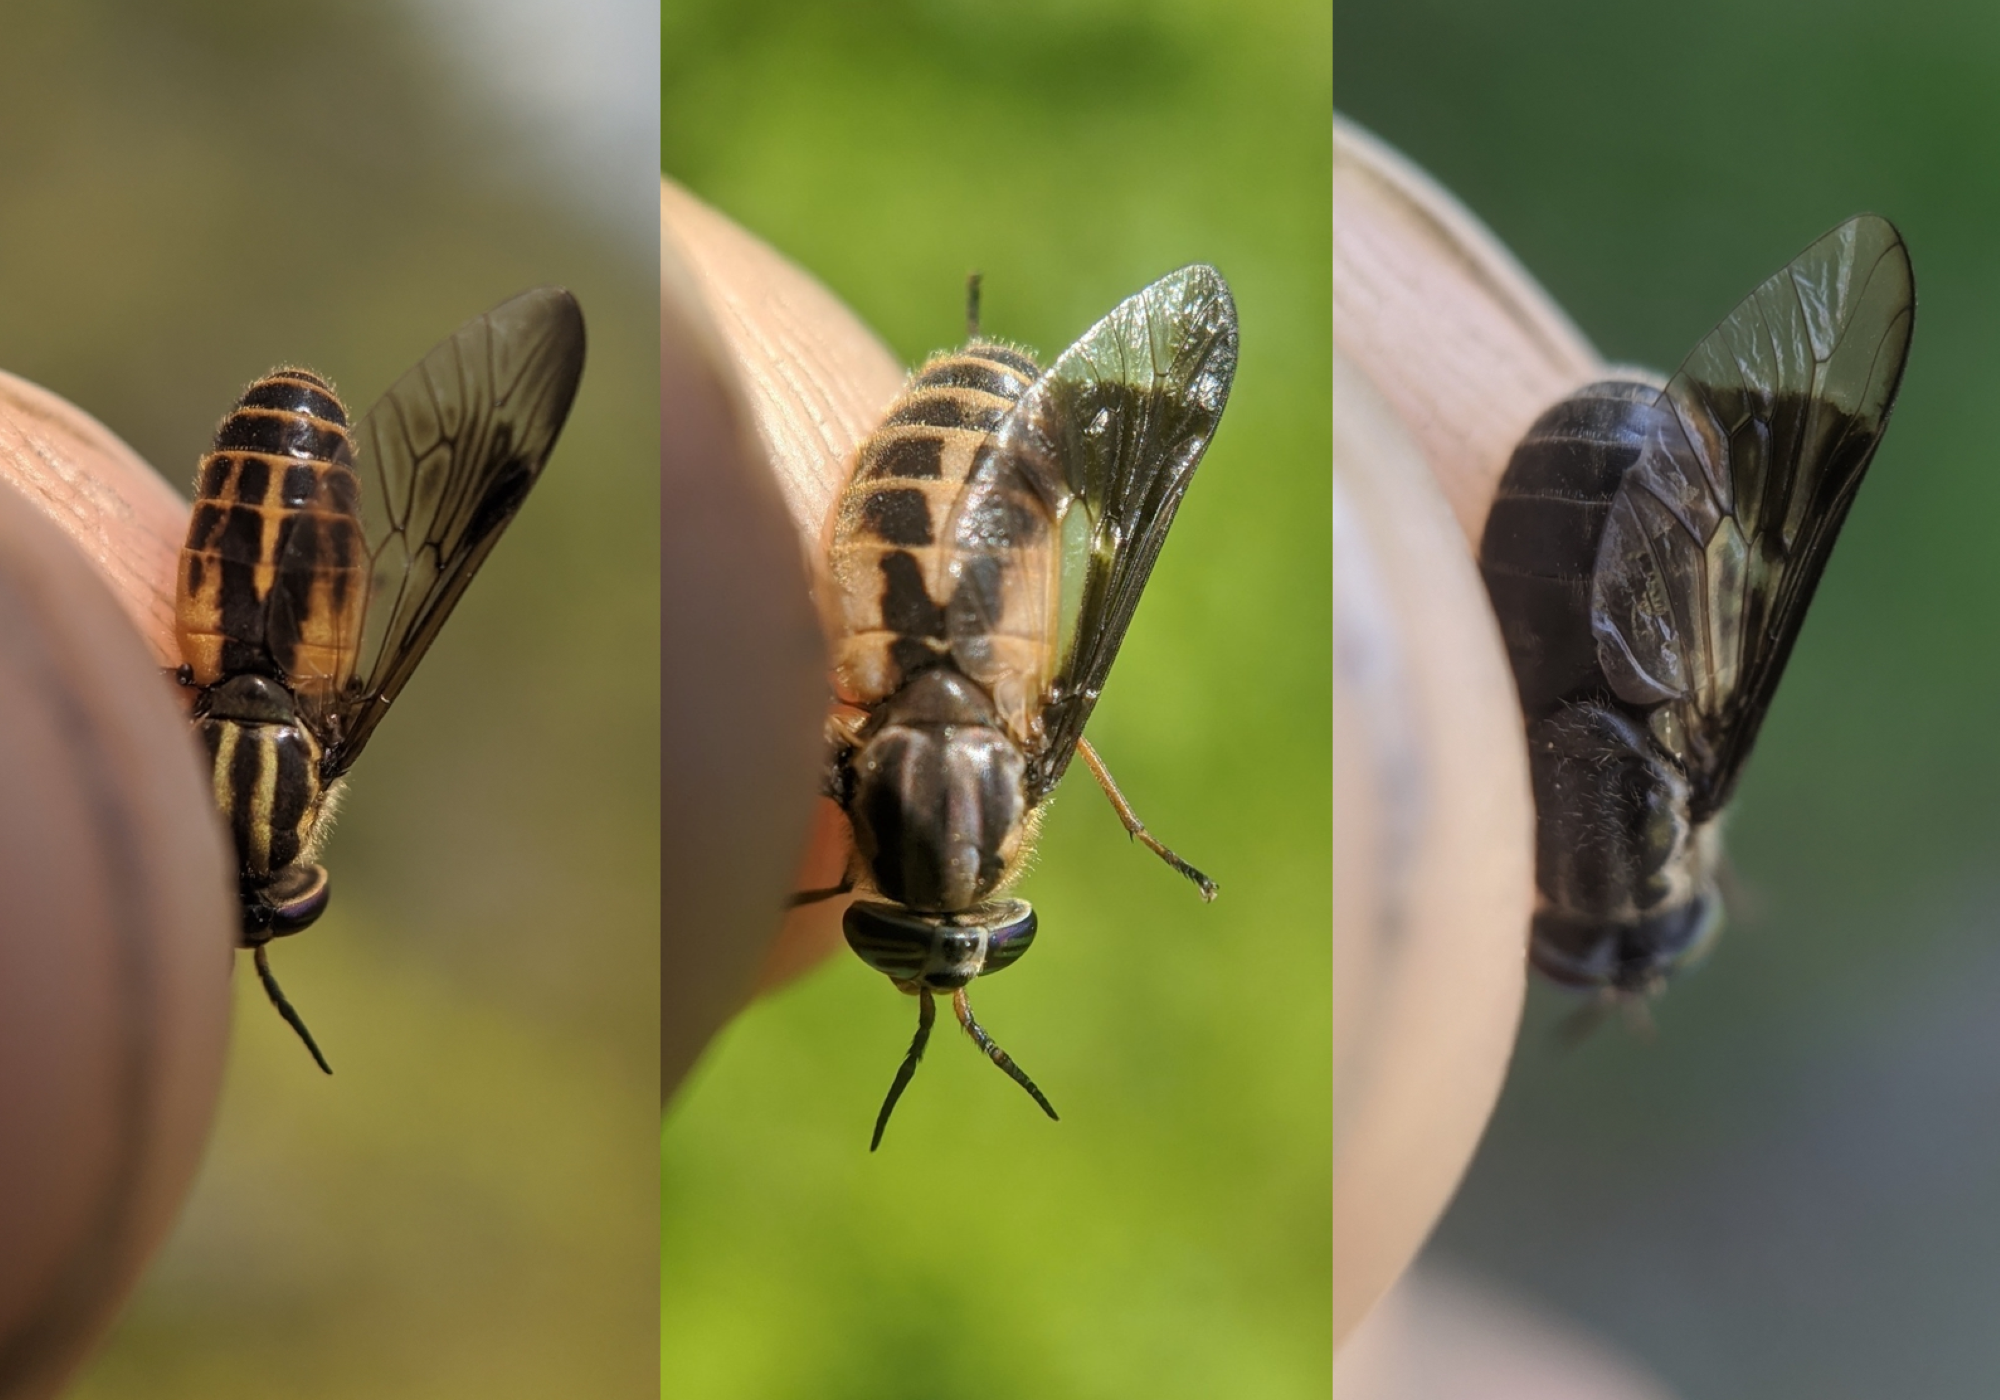 Deerfly species from left to right: Sherman's Deer Fly <i>(Chrysops shermani)</i>, <i>Chrysops indus</i>, Black Deer Fly <i>(Chrysops niger)</i> © Spencer Hardy